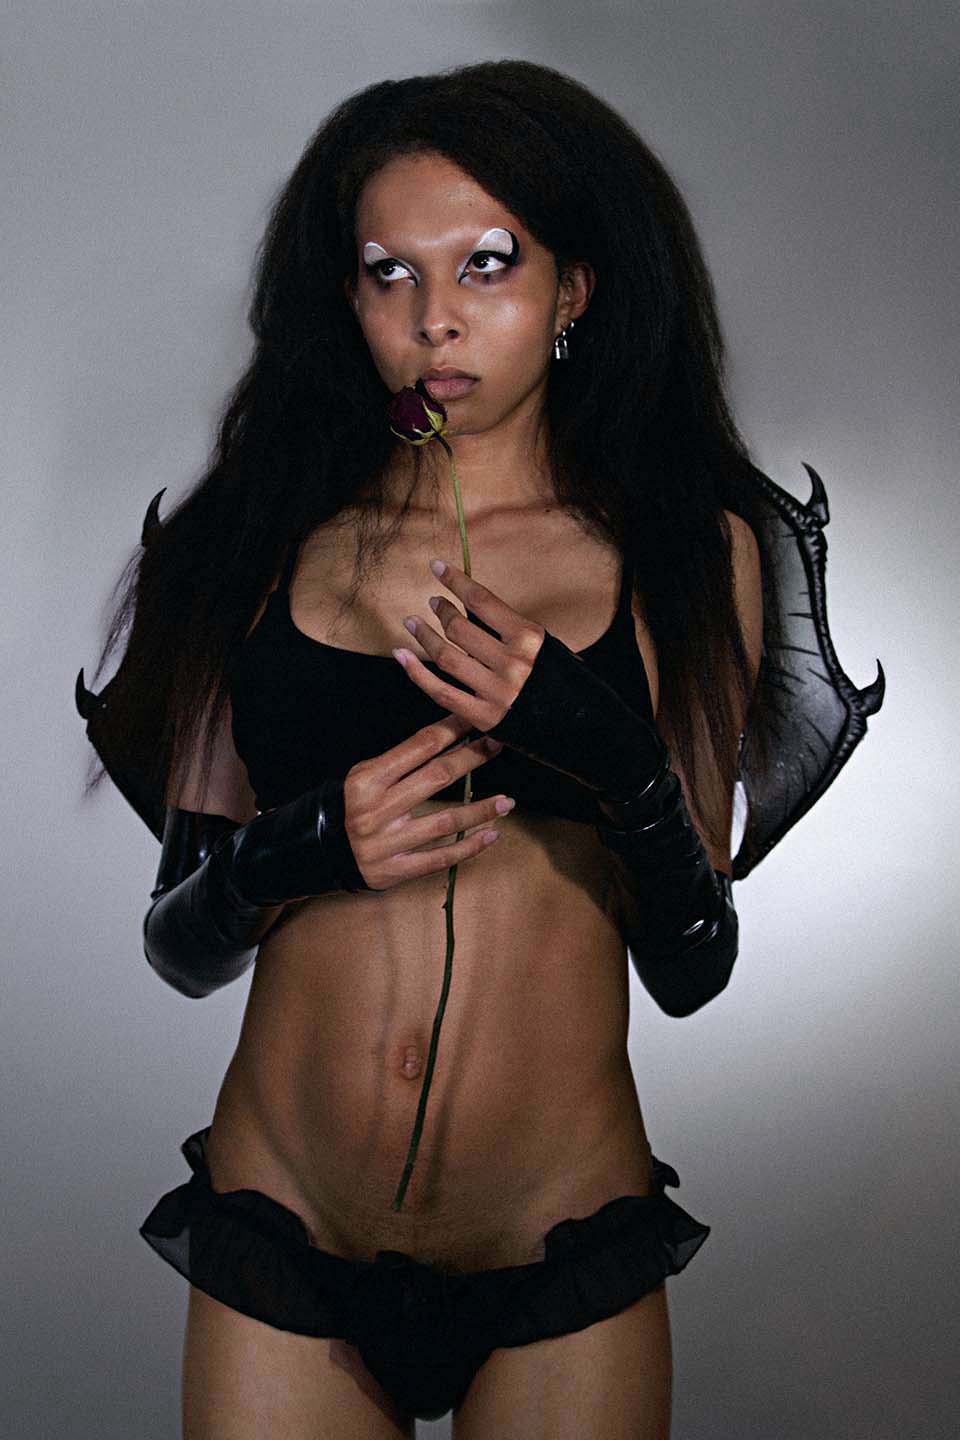 Alessa facing the camera with graphic eyeliner wearing black lingere, latex gloves and bat wings on a gray background